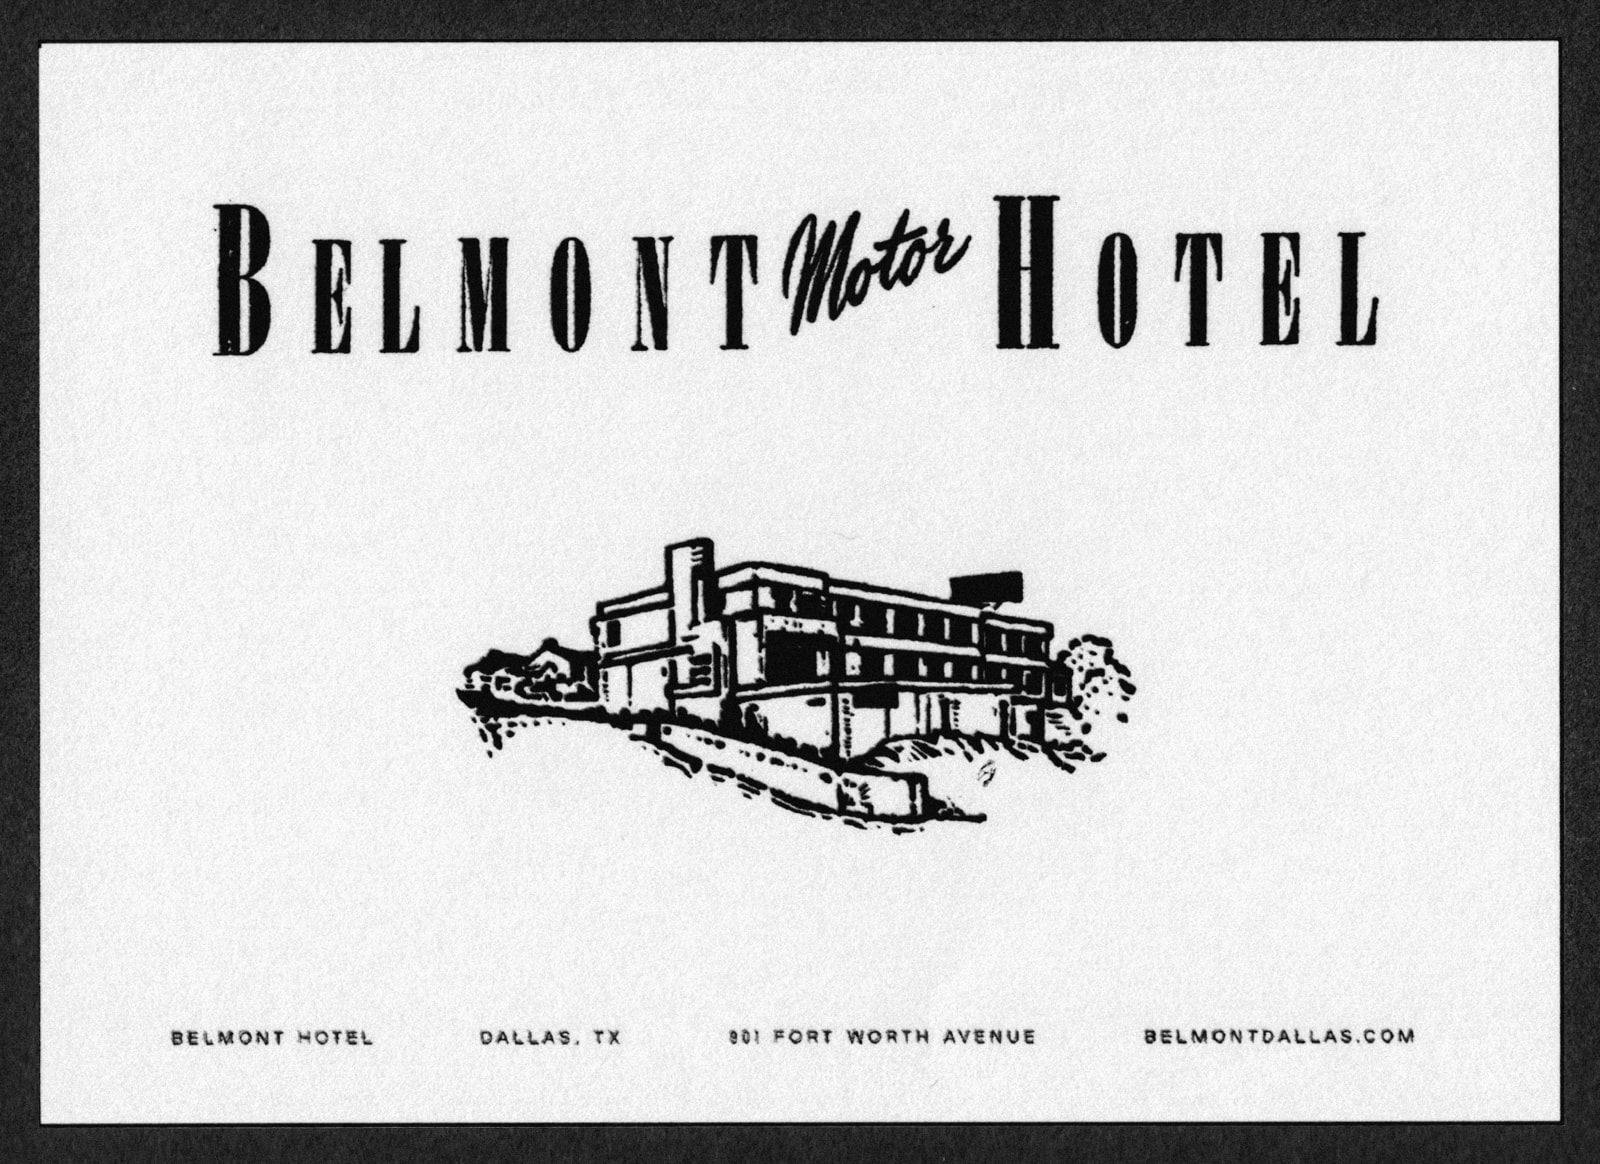 Title of Belmont Hotel and a sketch of its building